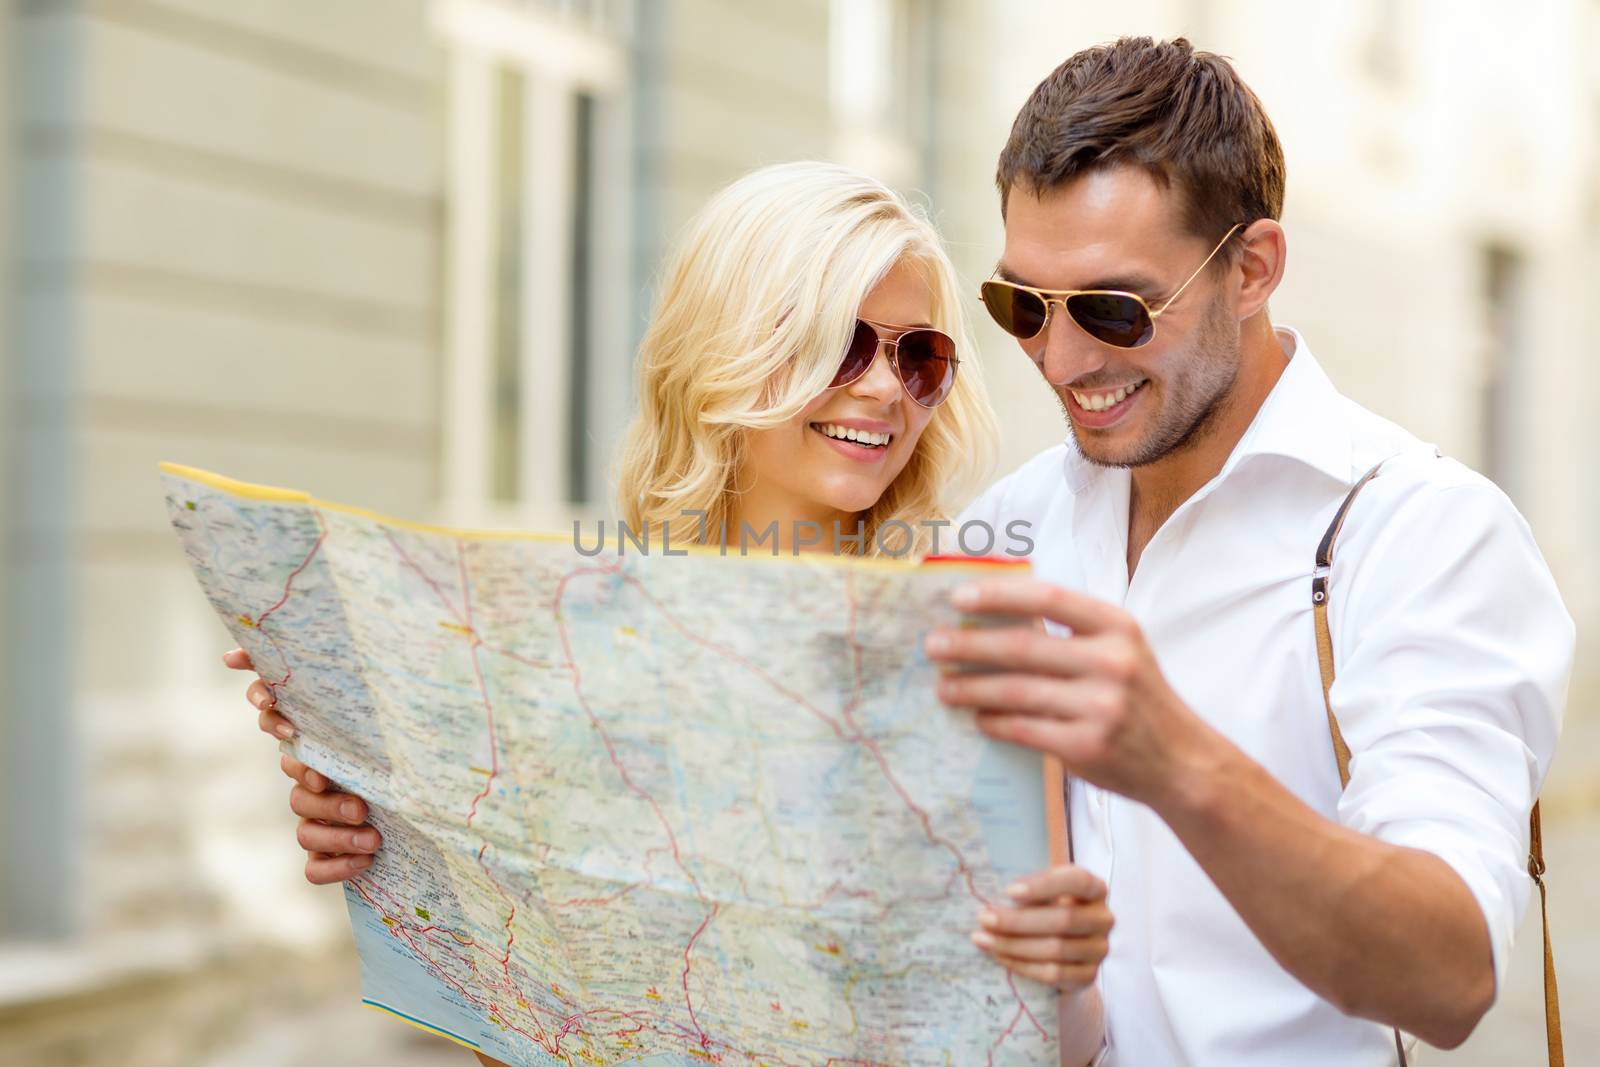 summer holidays, dating and tourism concept - smiling couple in sunglasses with map in the city